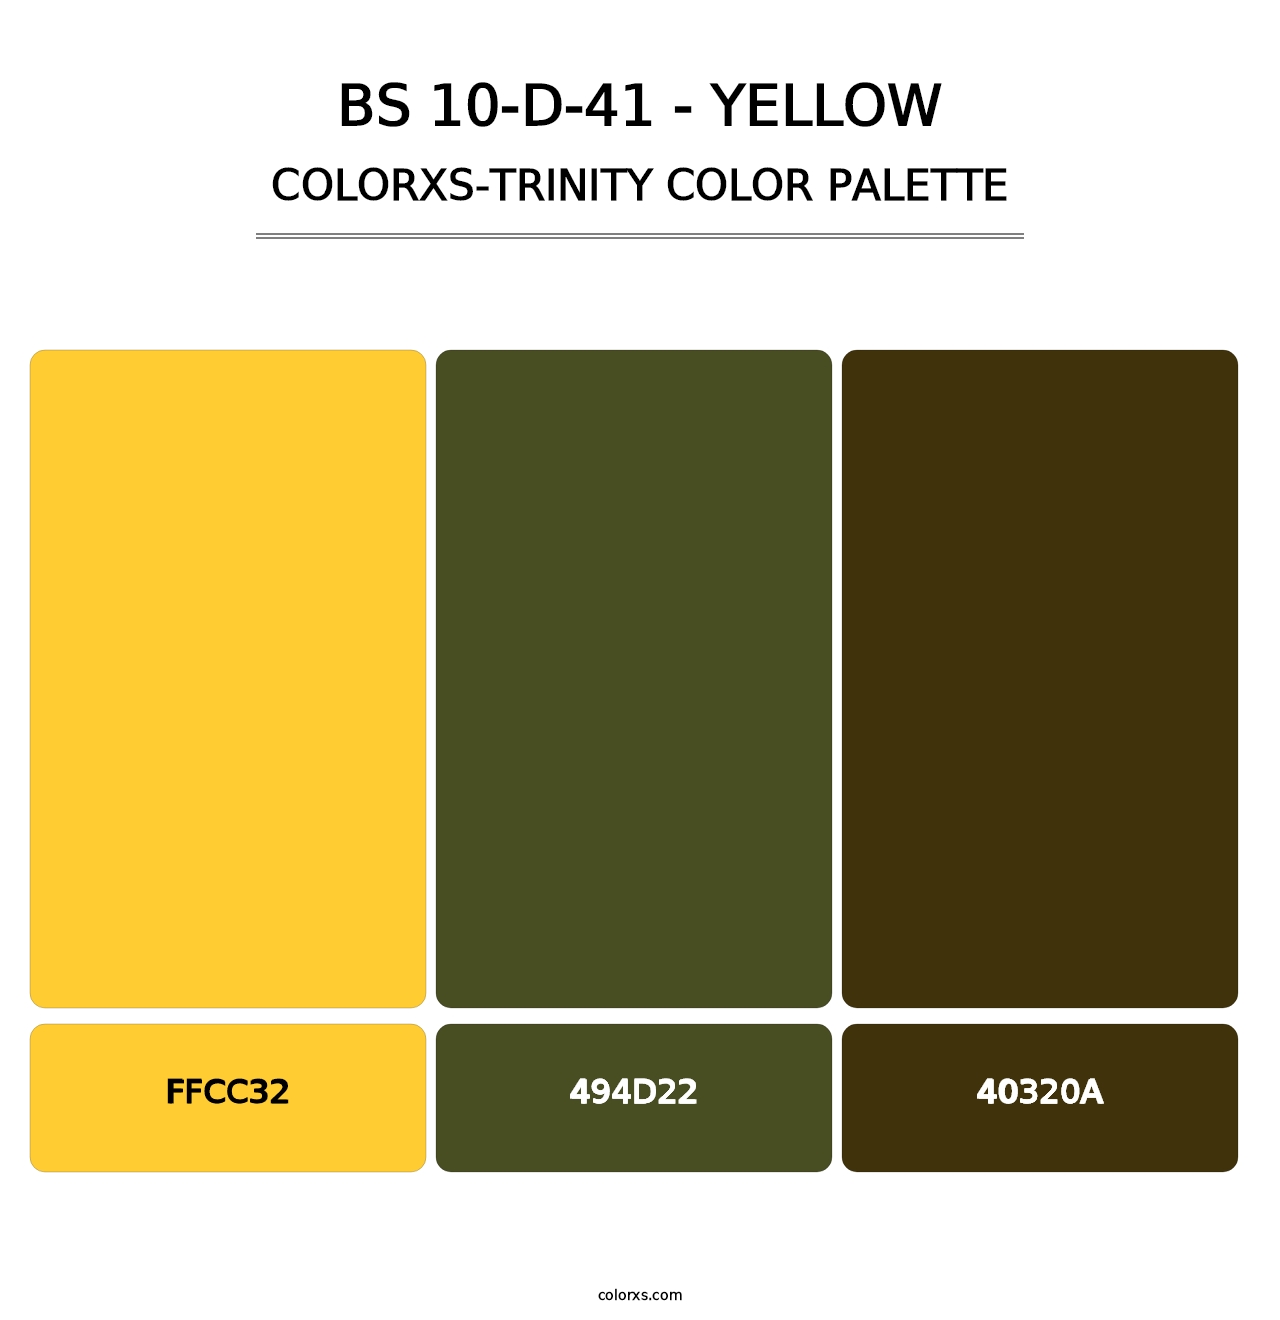 BS 10-D-41 - Yellow - Colorxs Trinity Palette